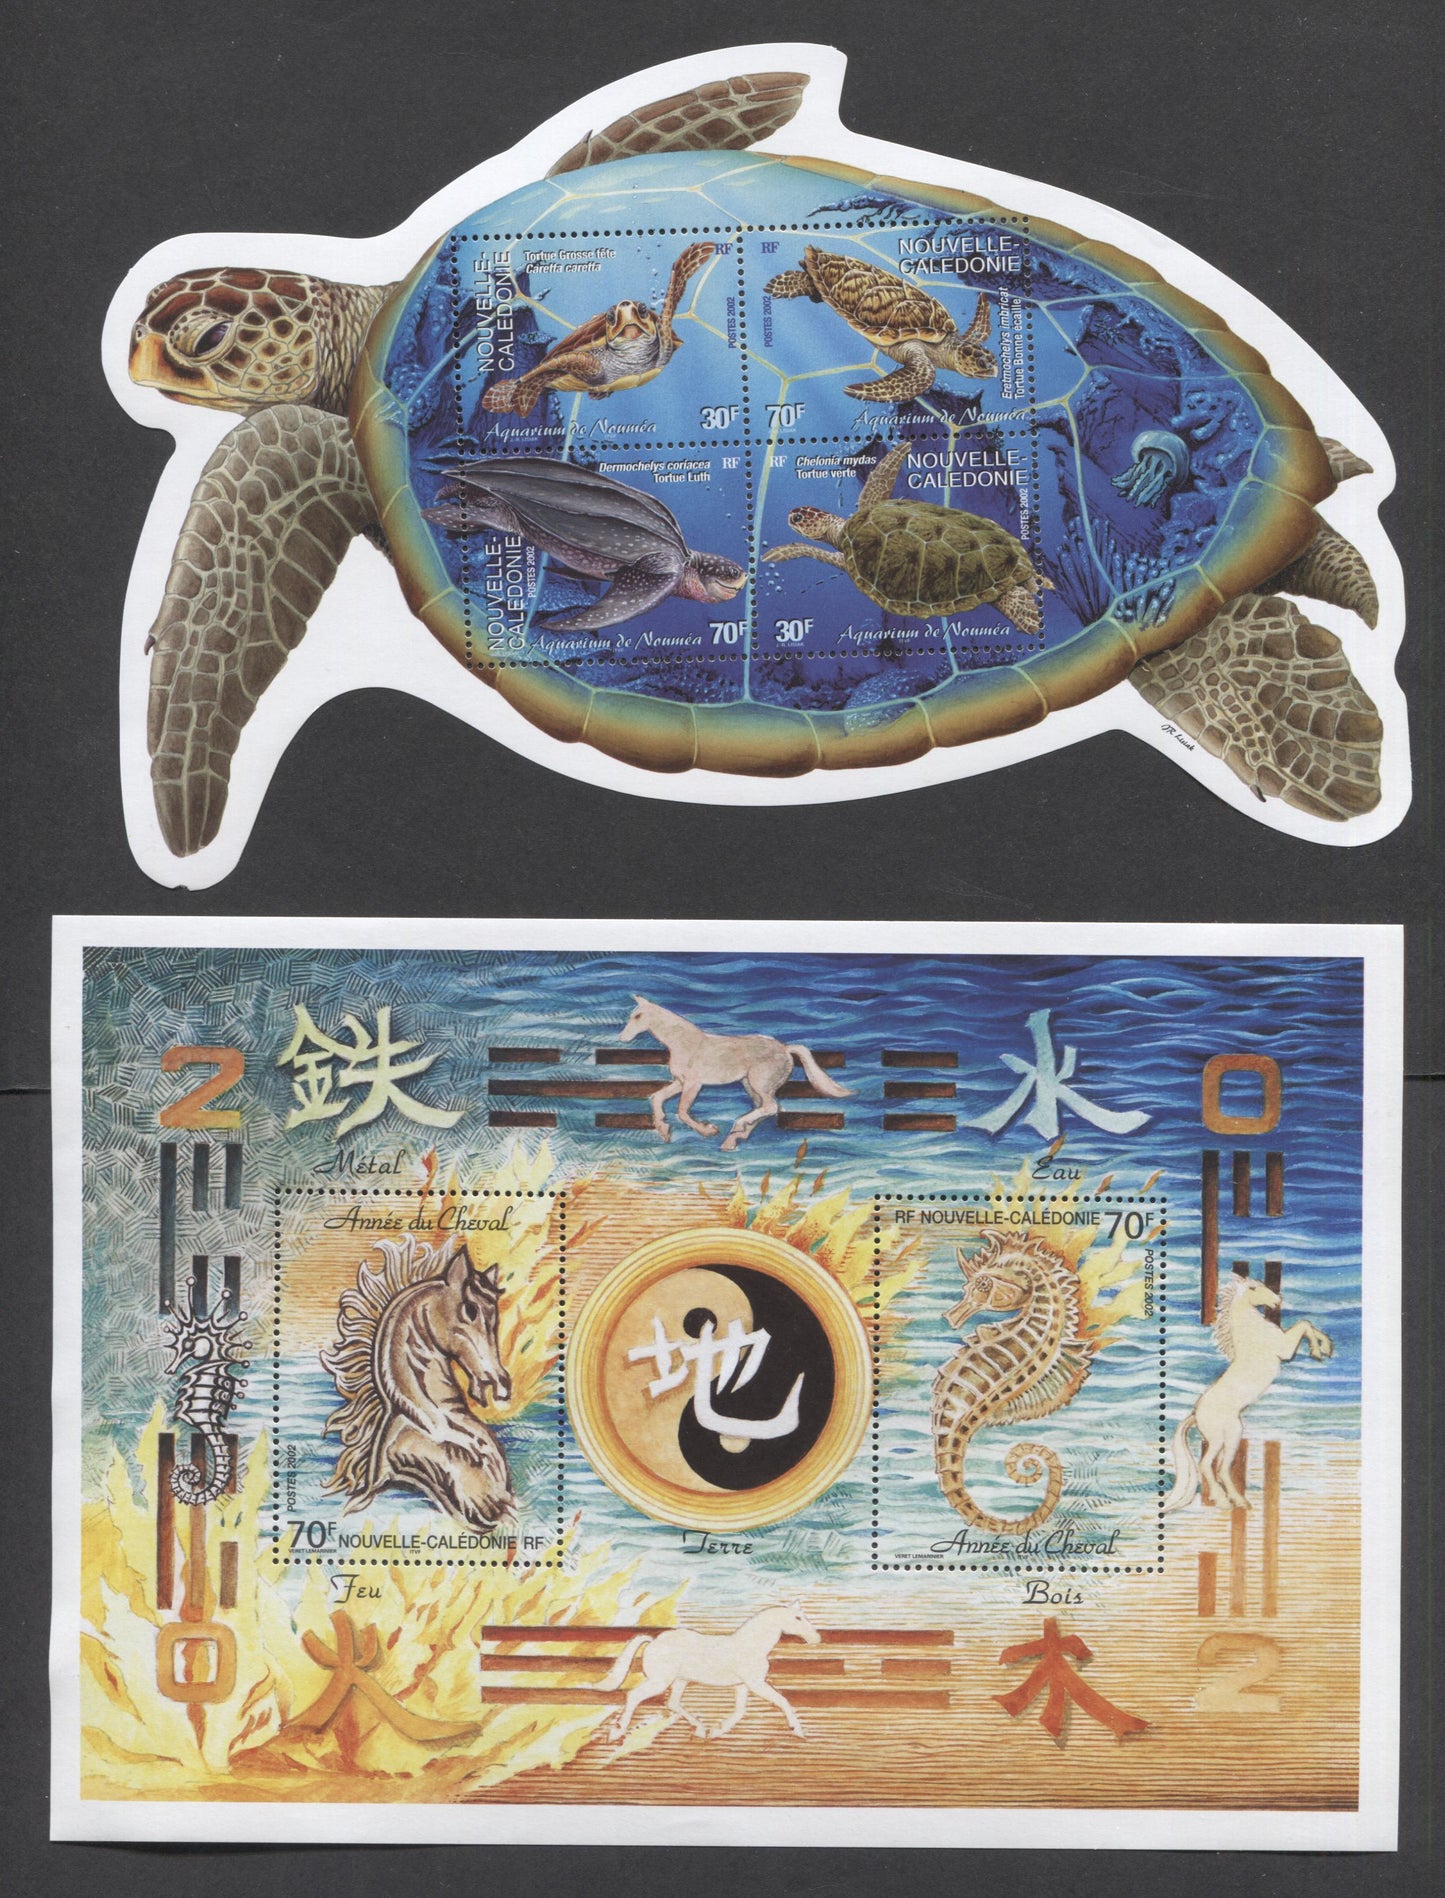 Lot 125 New Caledonia SC#849/899 2000-2002 Noumea Aquarium, Year Of The Horse & Turtles Issues, 6 VFNH Singles & Souvenir Sheets, Click on Listing to See ALL Pictures, 2017 Scott Cat. $20.25